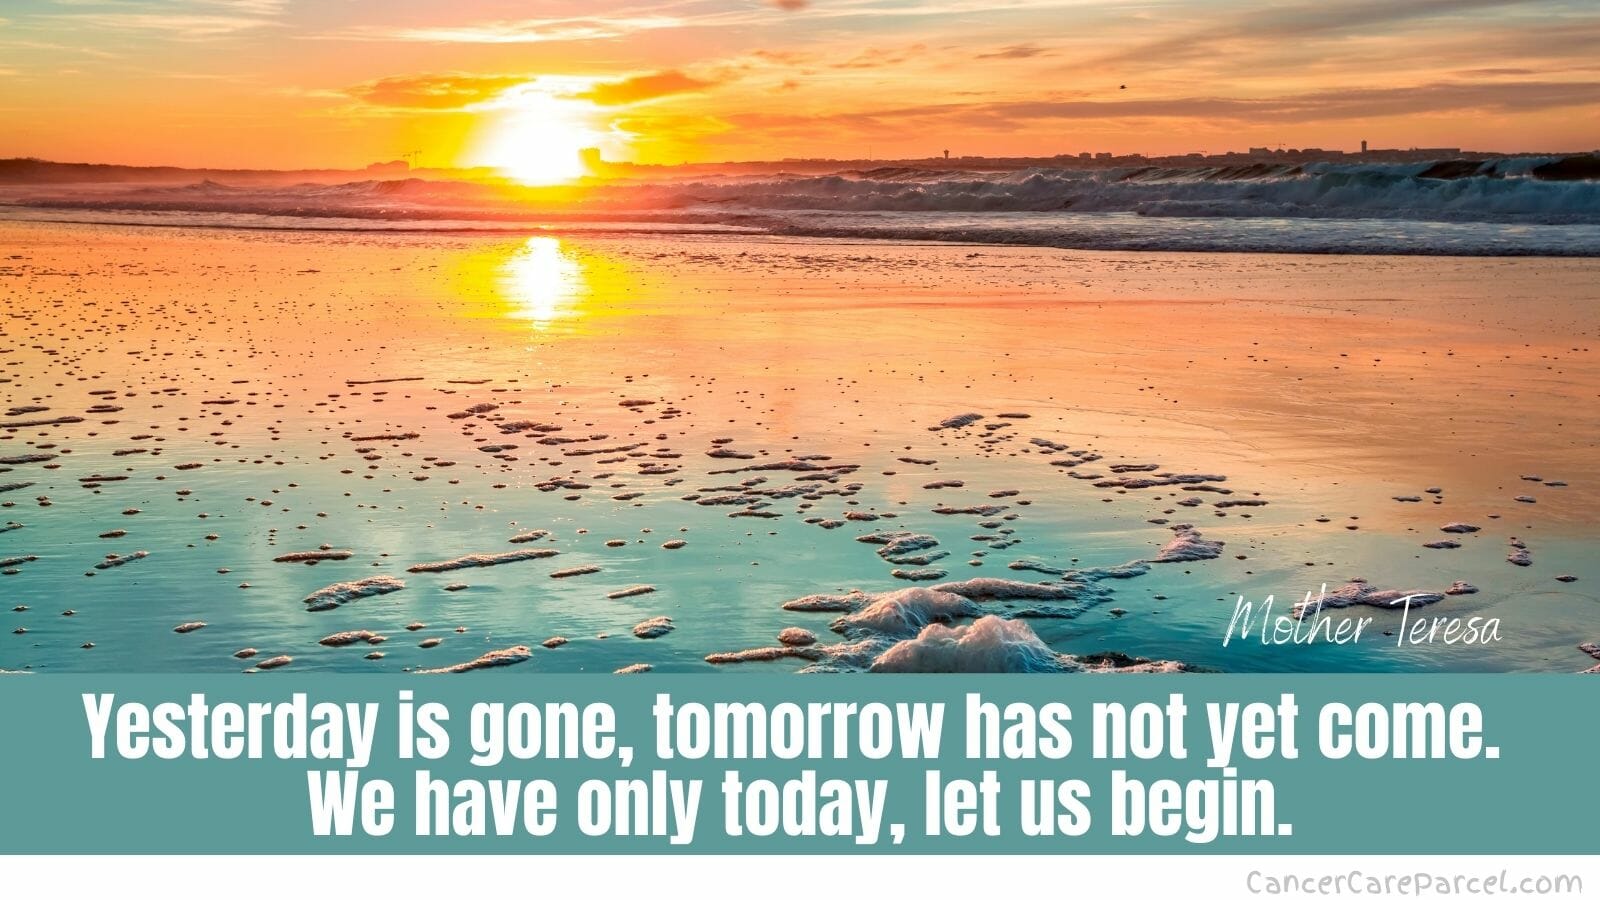 Yesterday is gone, tomorrow has not yet come. We have only today, let us begin.